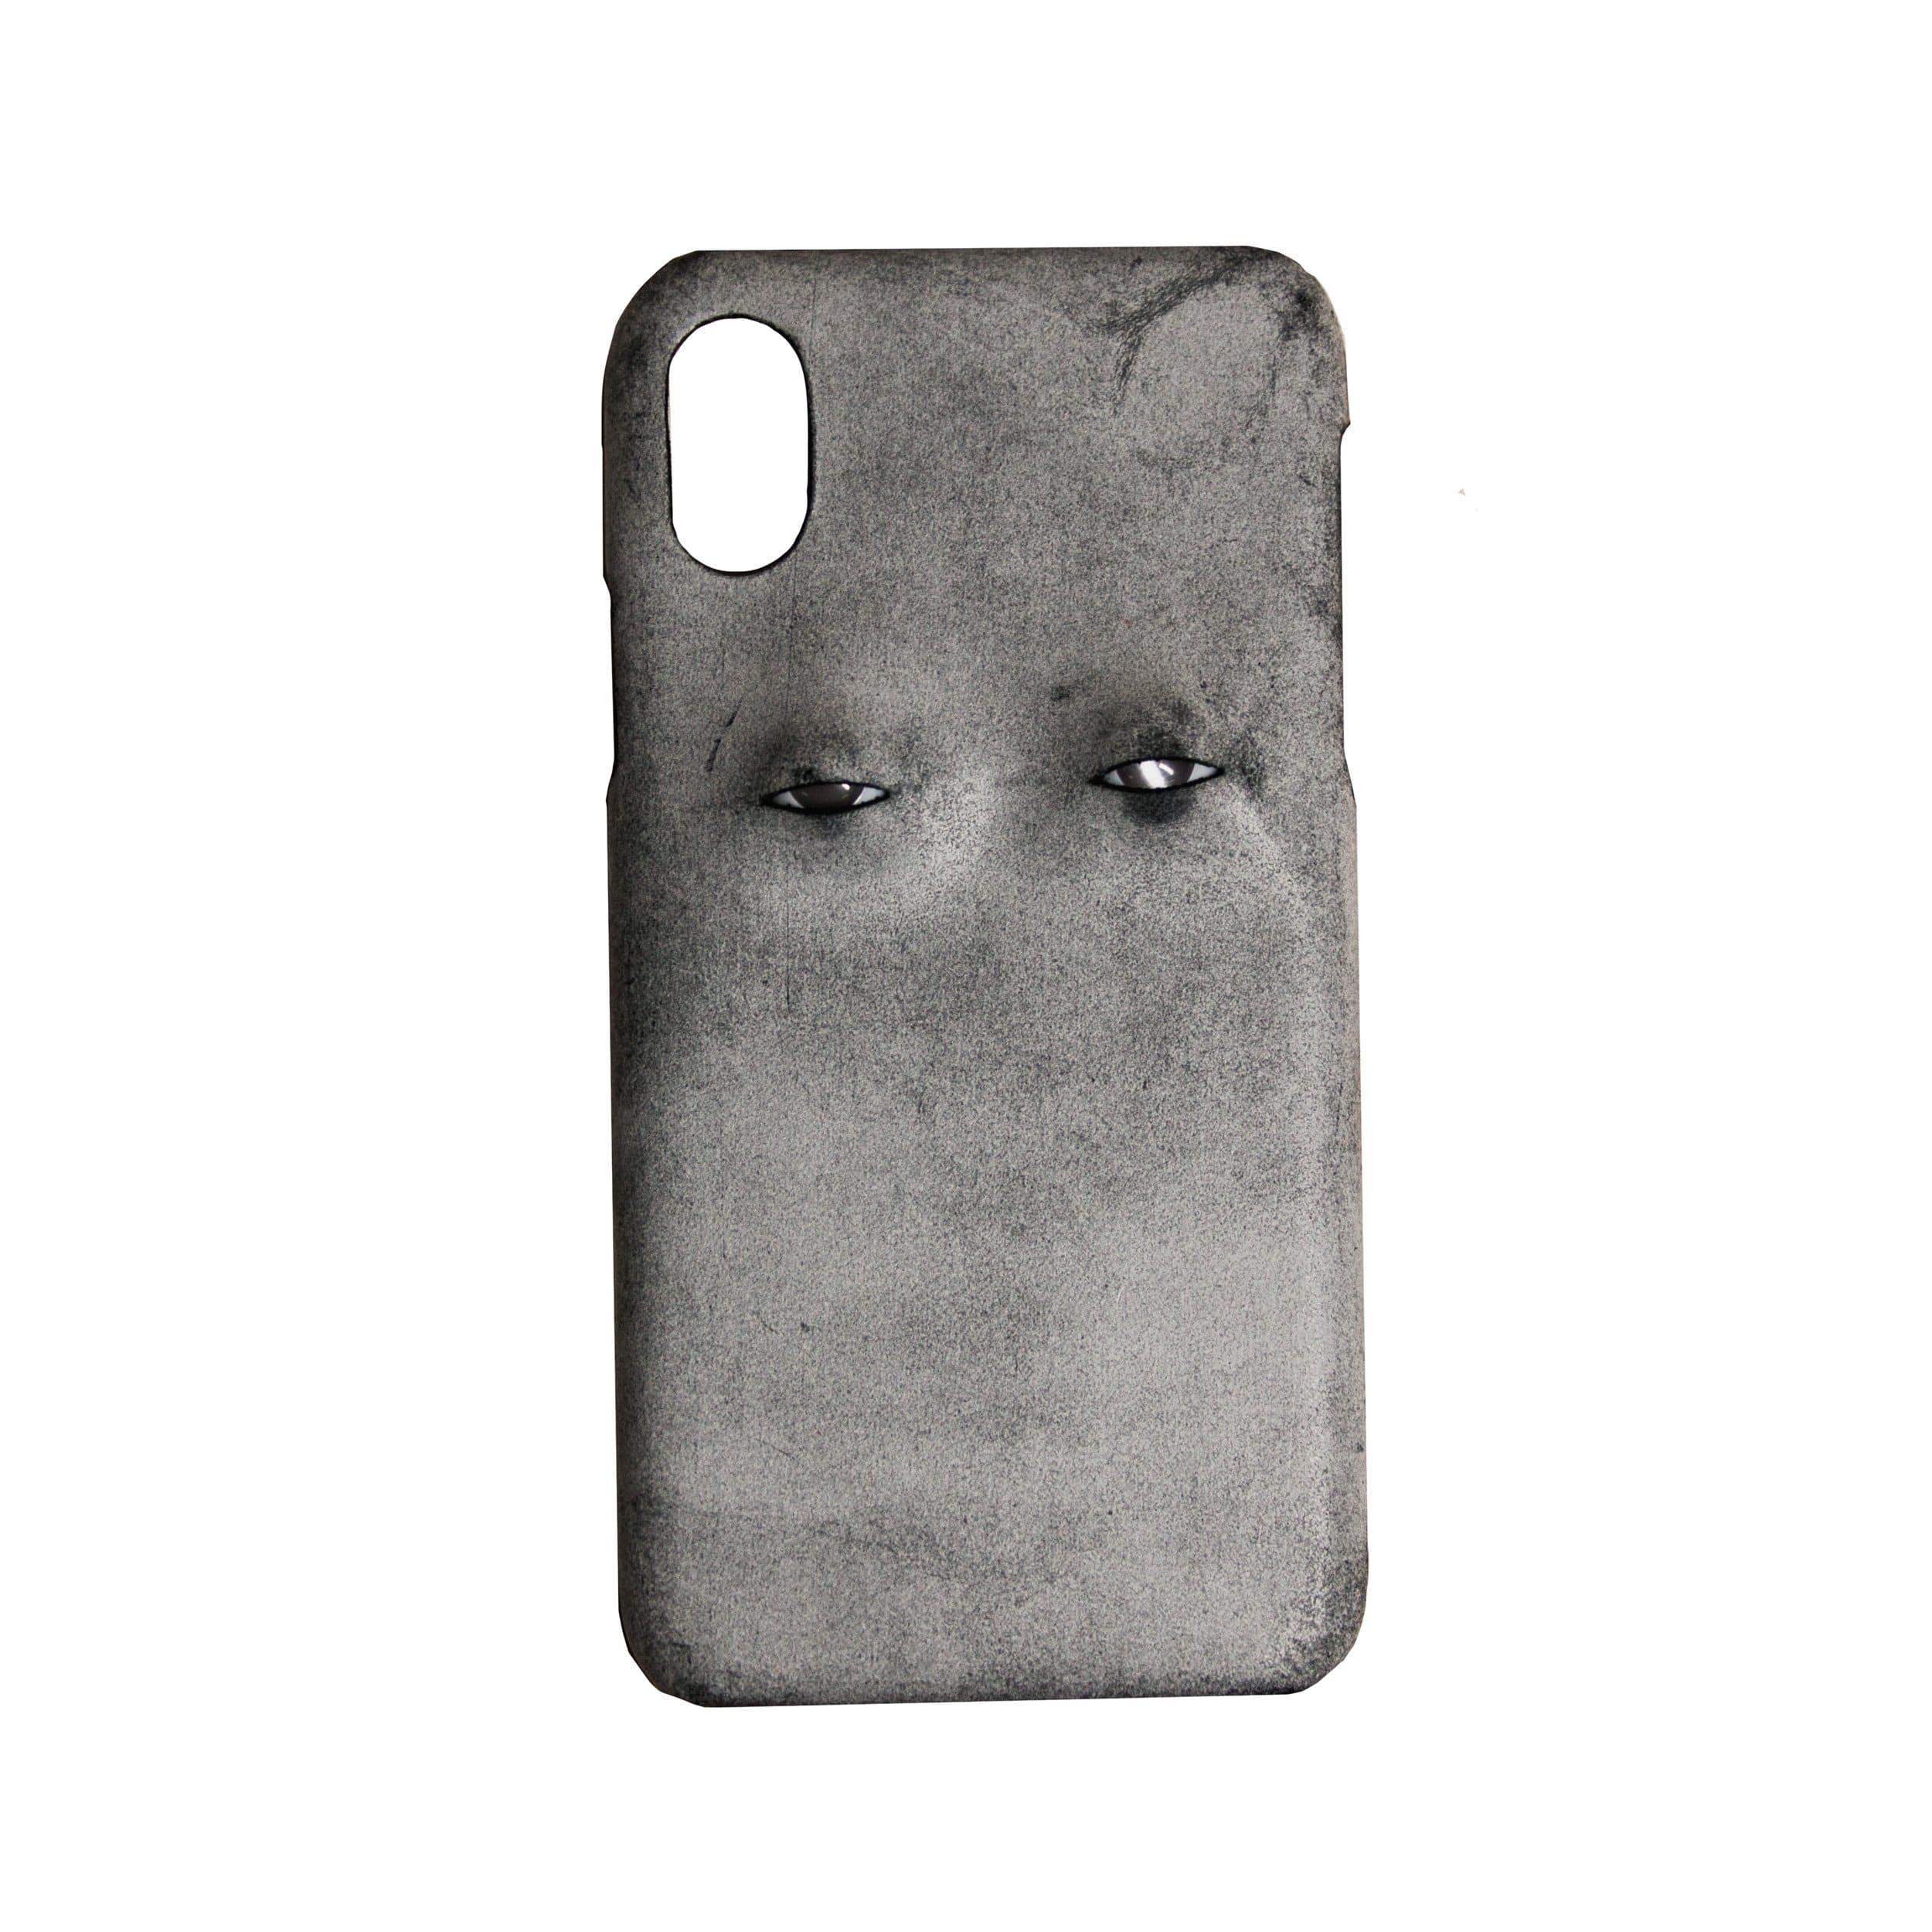 The Eyes Leather Handmade Protective Designer iPhone Case For All 